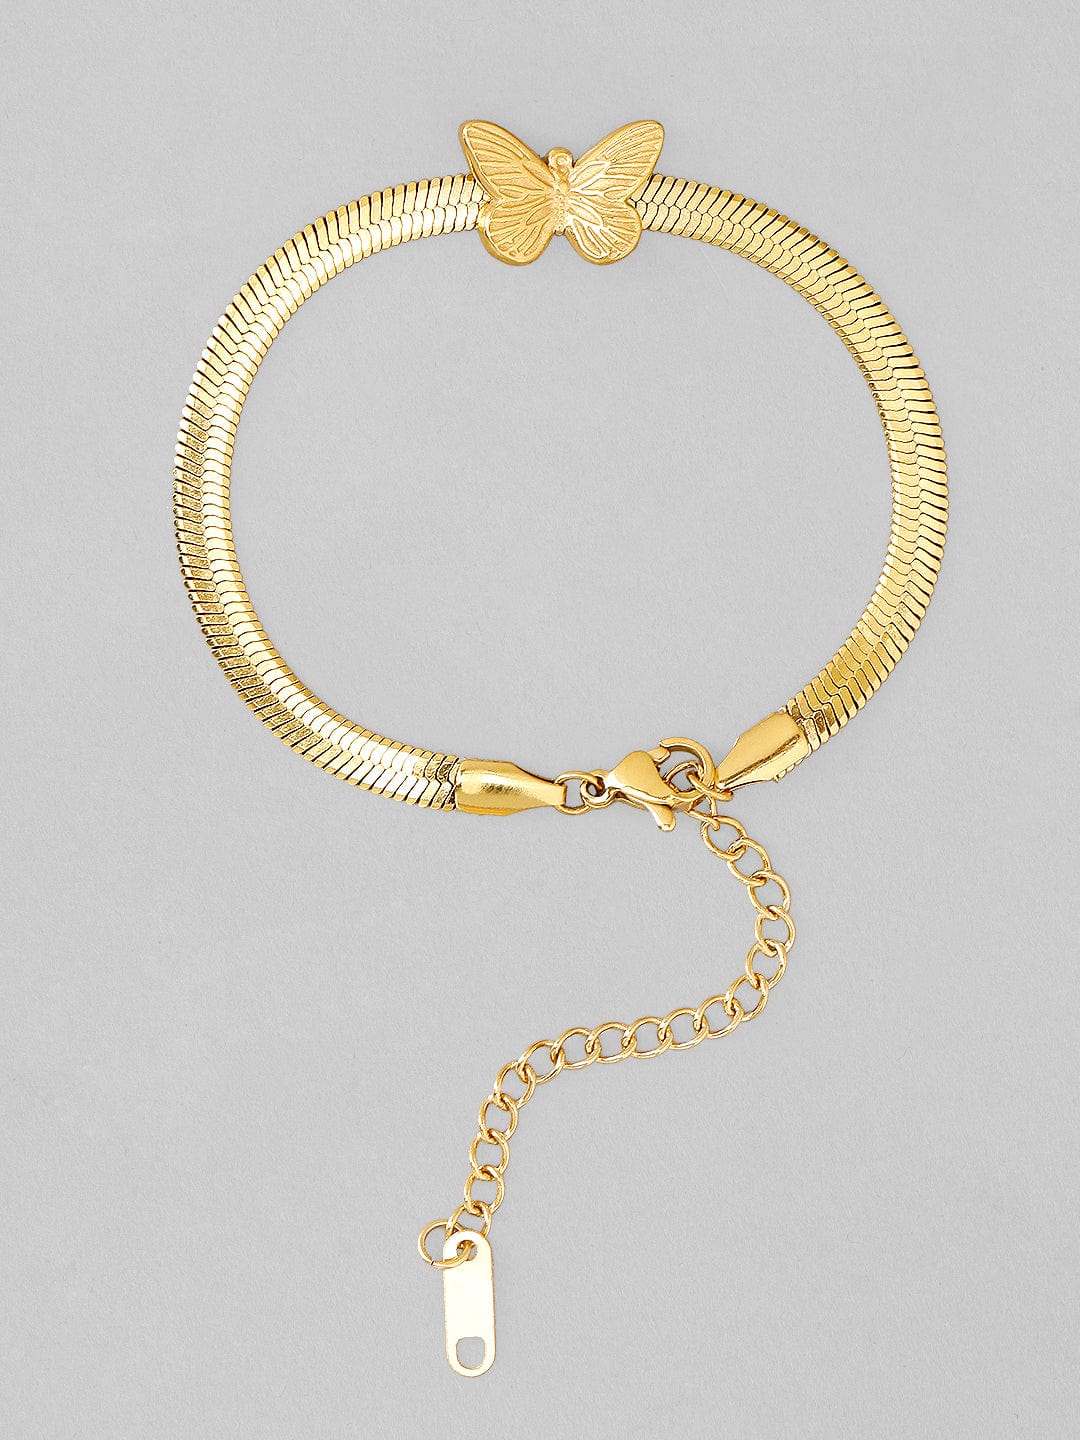 Snake Chain Bracelet in 18ct Gold Vermeil on Sterling Silver  Jewellery by  Monica Vinader